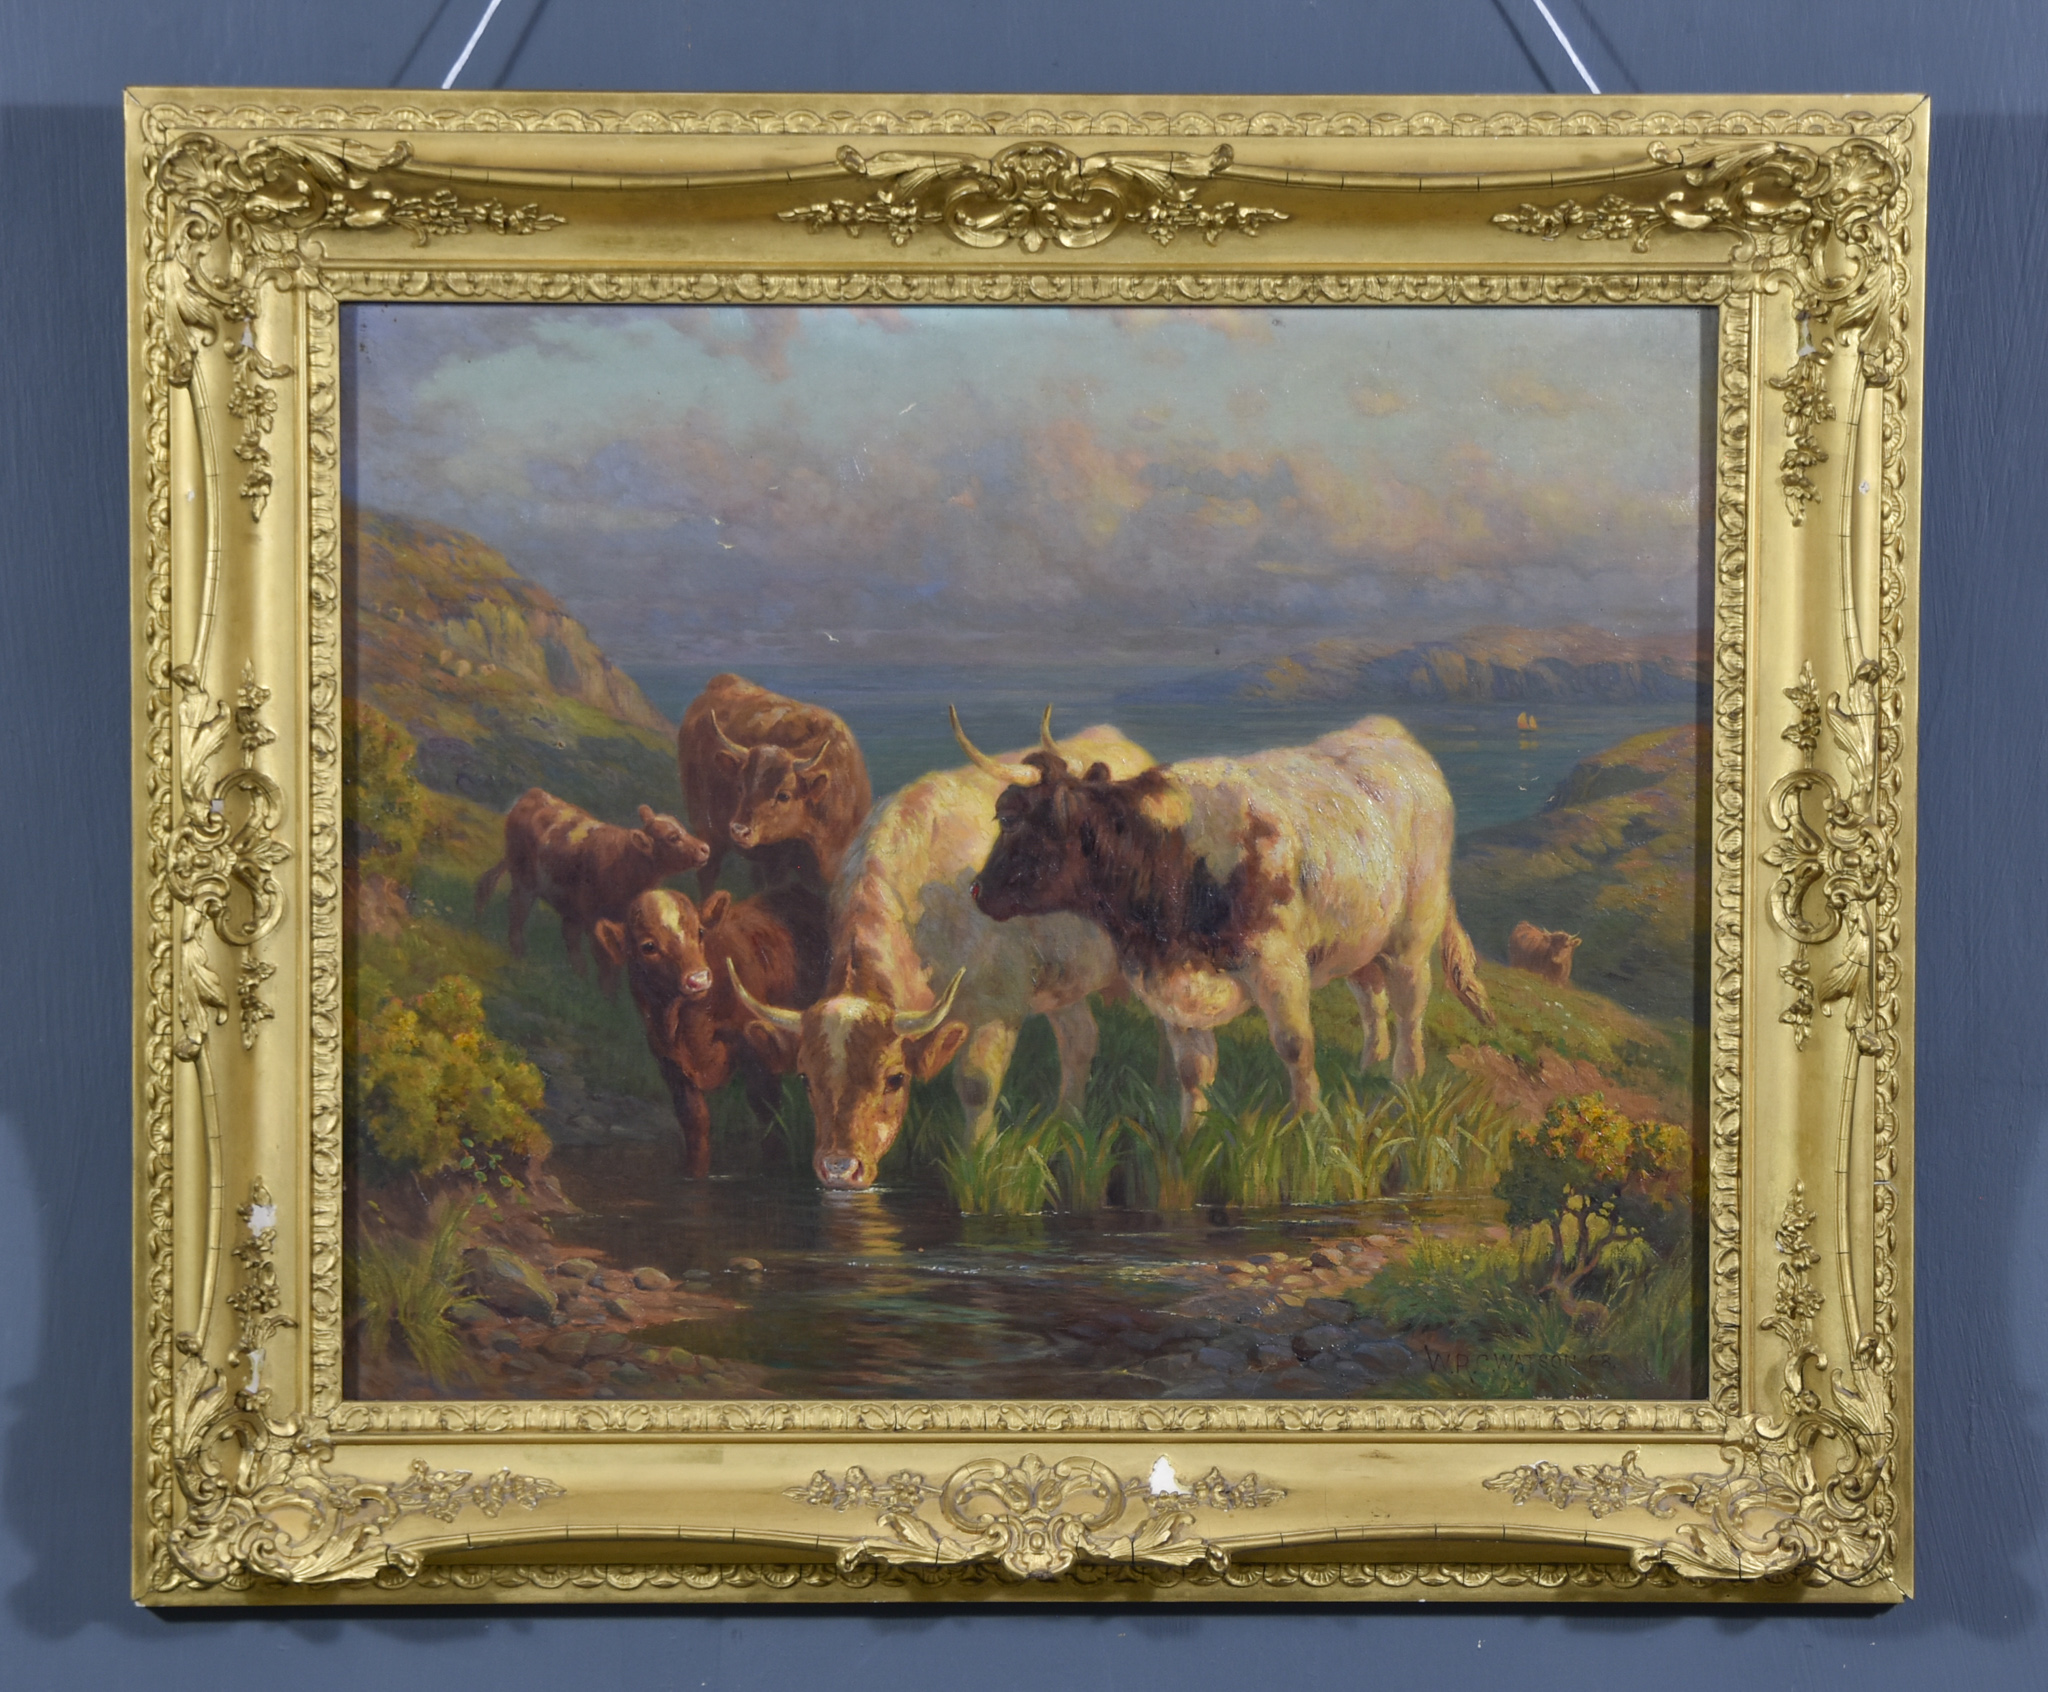 William R. C. Watson (fl. 1890-1900) - Oil painting - "On the Cliffs Near Land's End" - cattle - Image 2 of 4